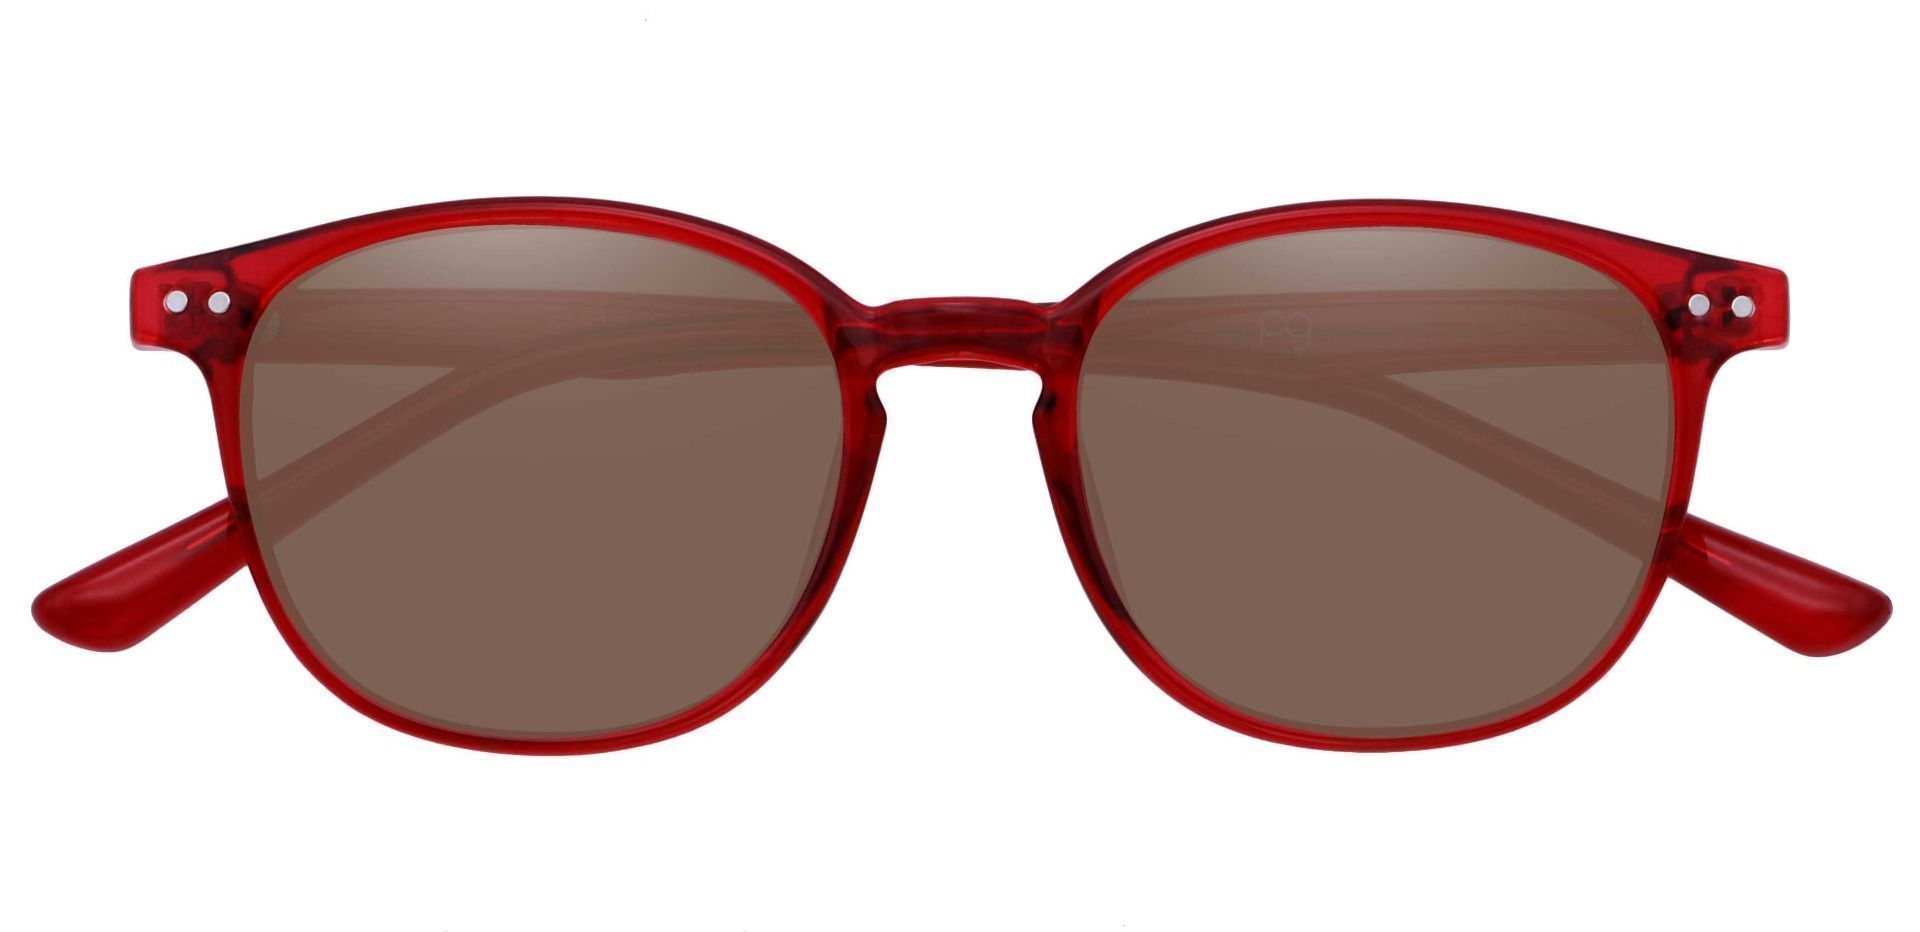 Holstein Oval Prescription Sunglasses - Red Frame With Brown Lenses